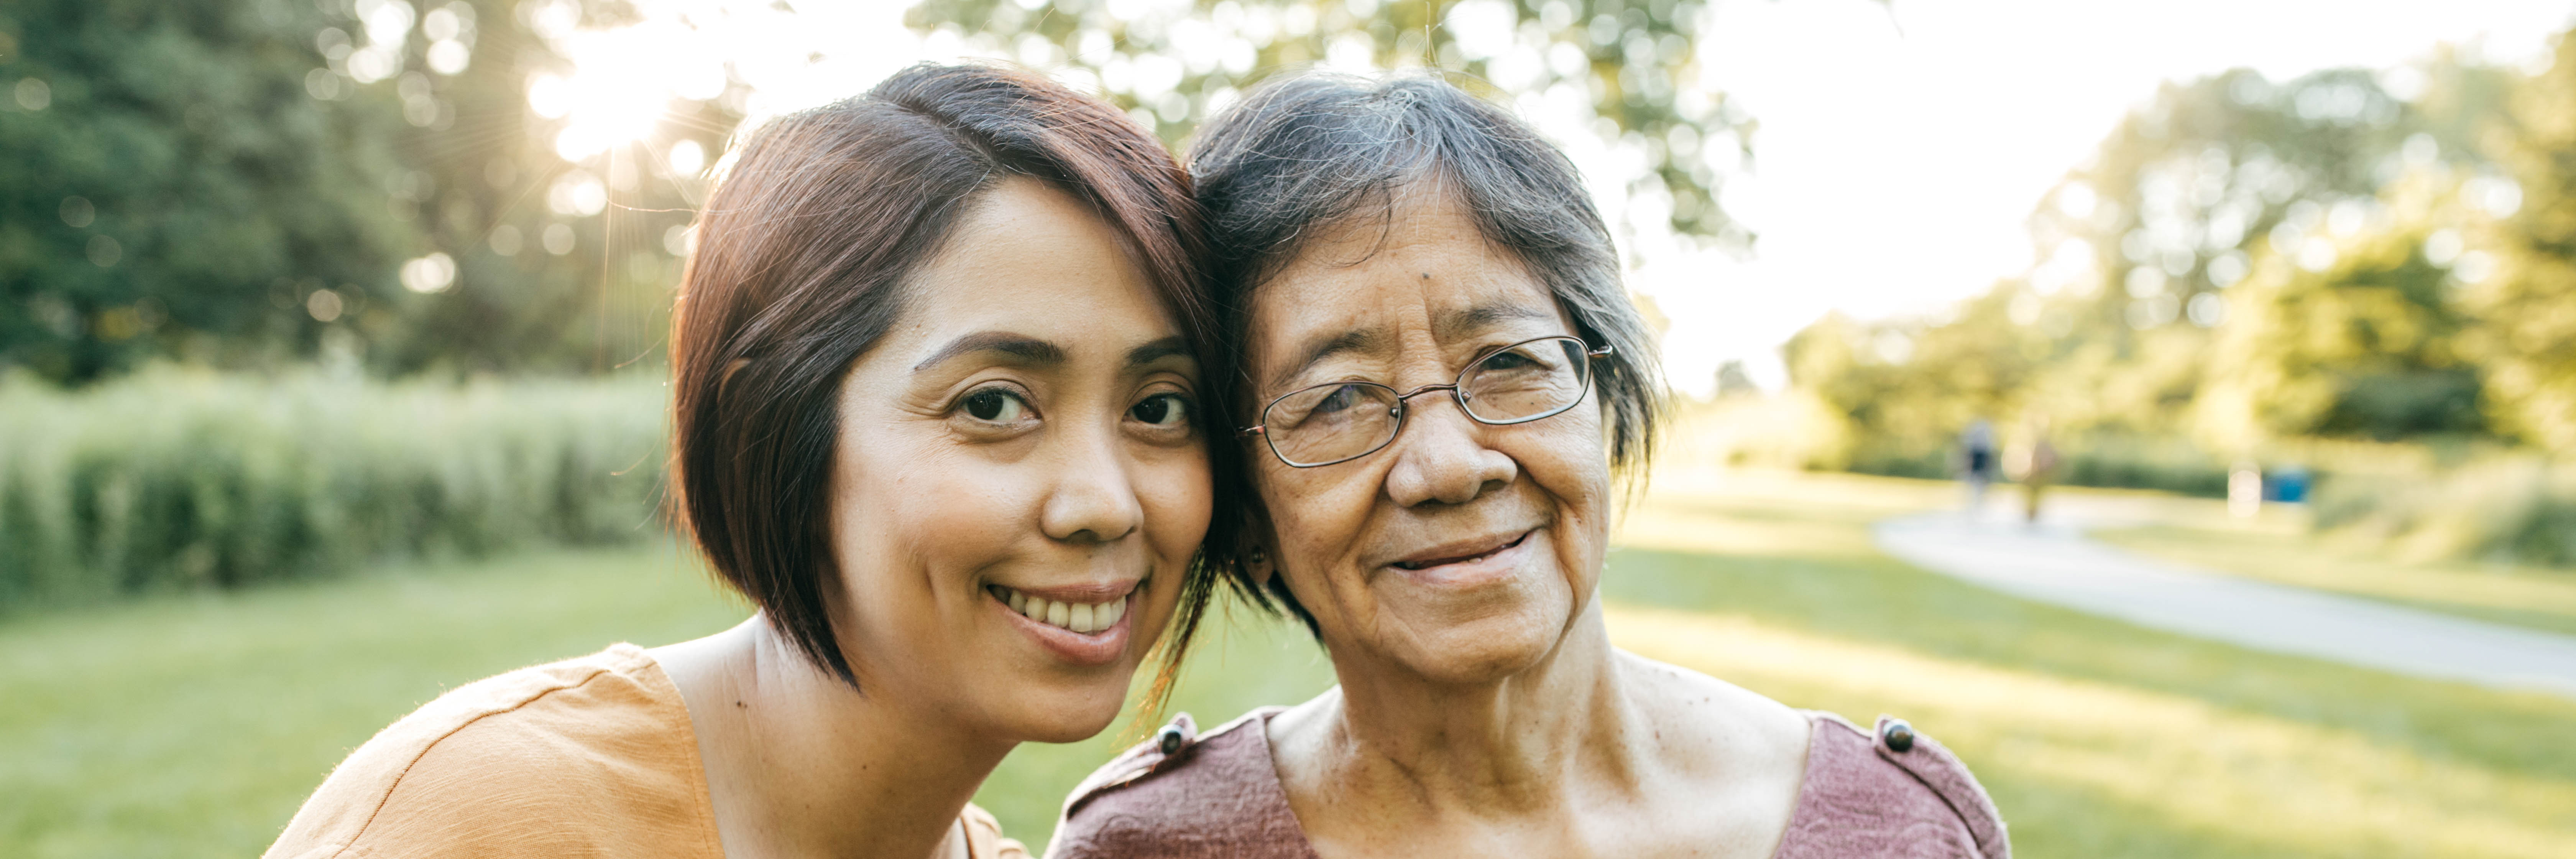 Middle-aged woman standing close to her senior mother, with their heads touching and smiling, outdoors on a sunny day at a park.